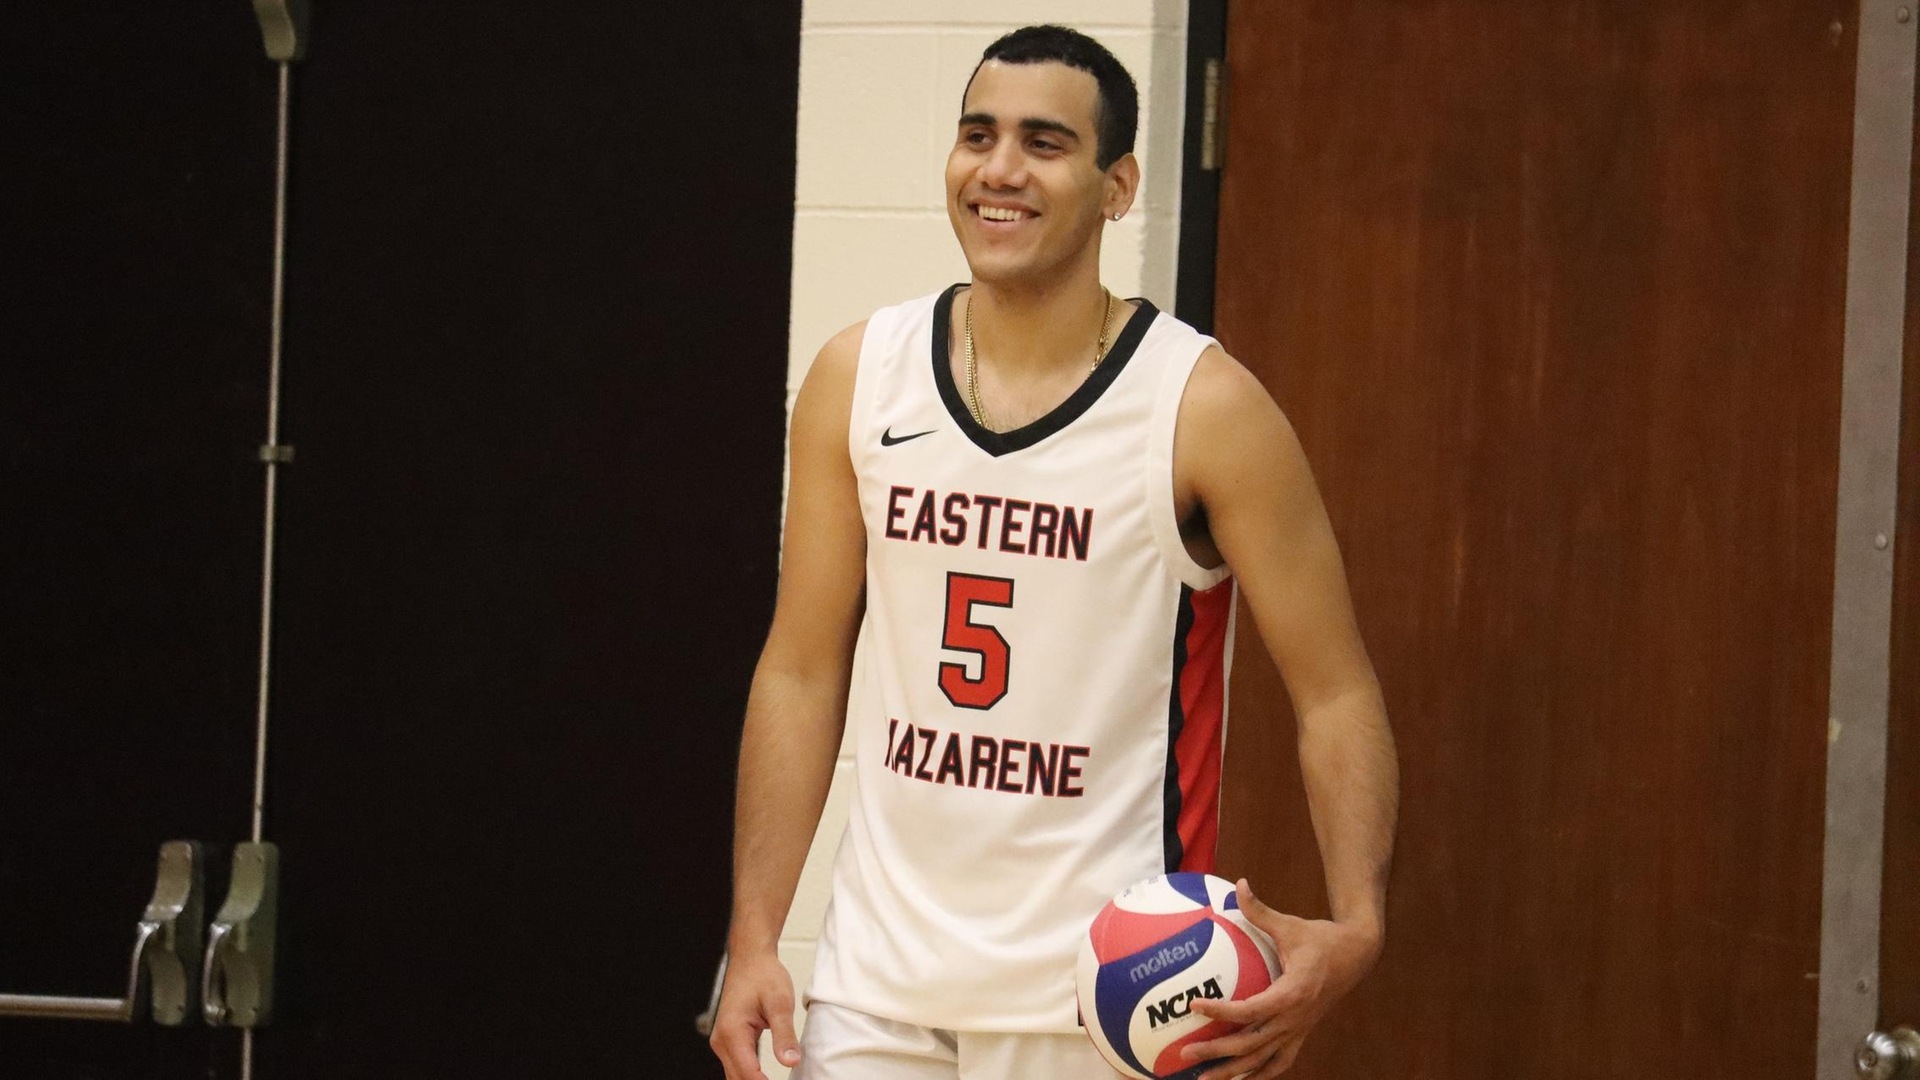 Men’s Volleyball’s Alejandro Garcia Fernandez Collects Third-Straight NEVC Player of the Week Award